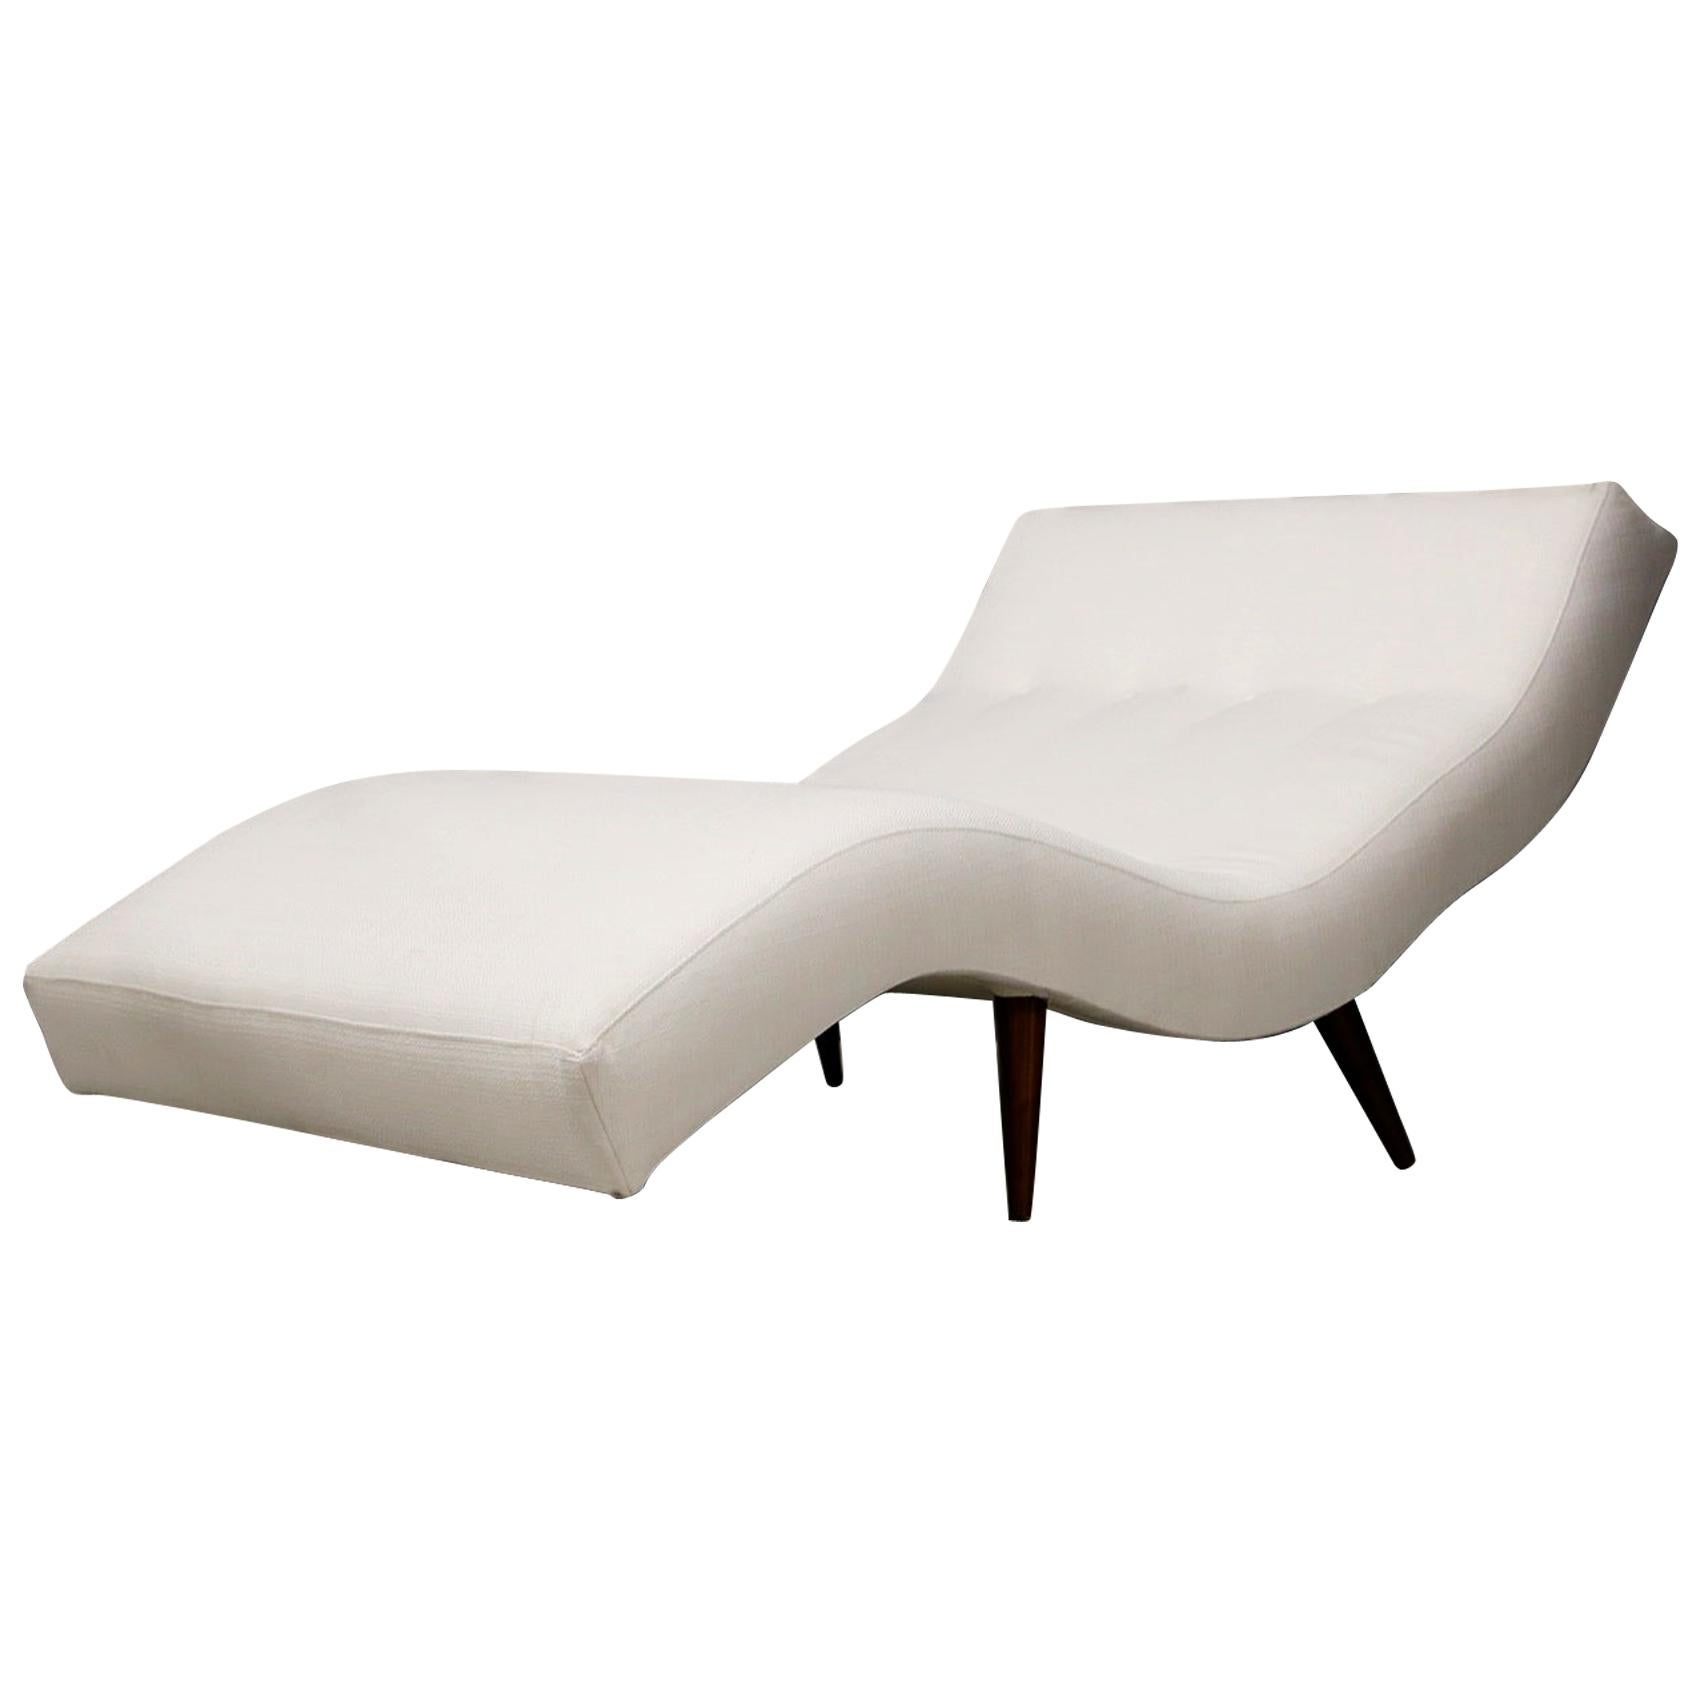 Adrian Pearsall for Craft Associates Mid-Century Modern Wave Chaise Lounge Chair